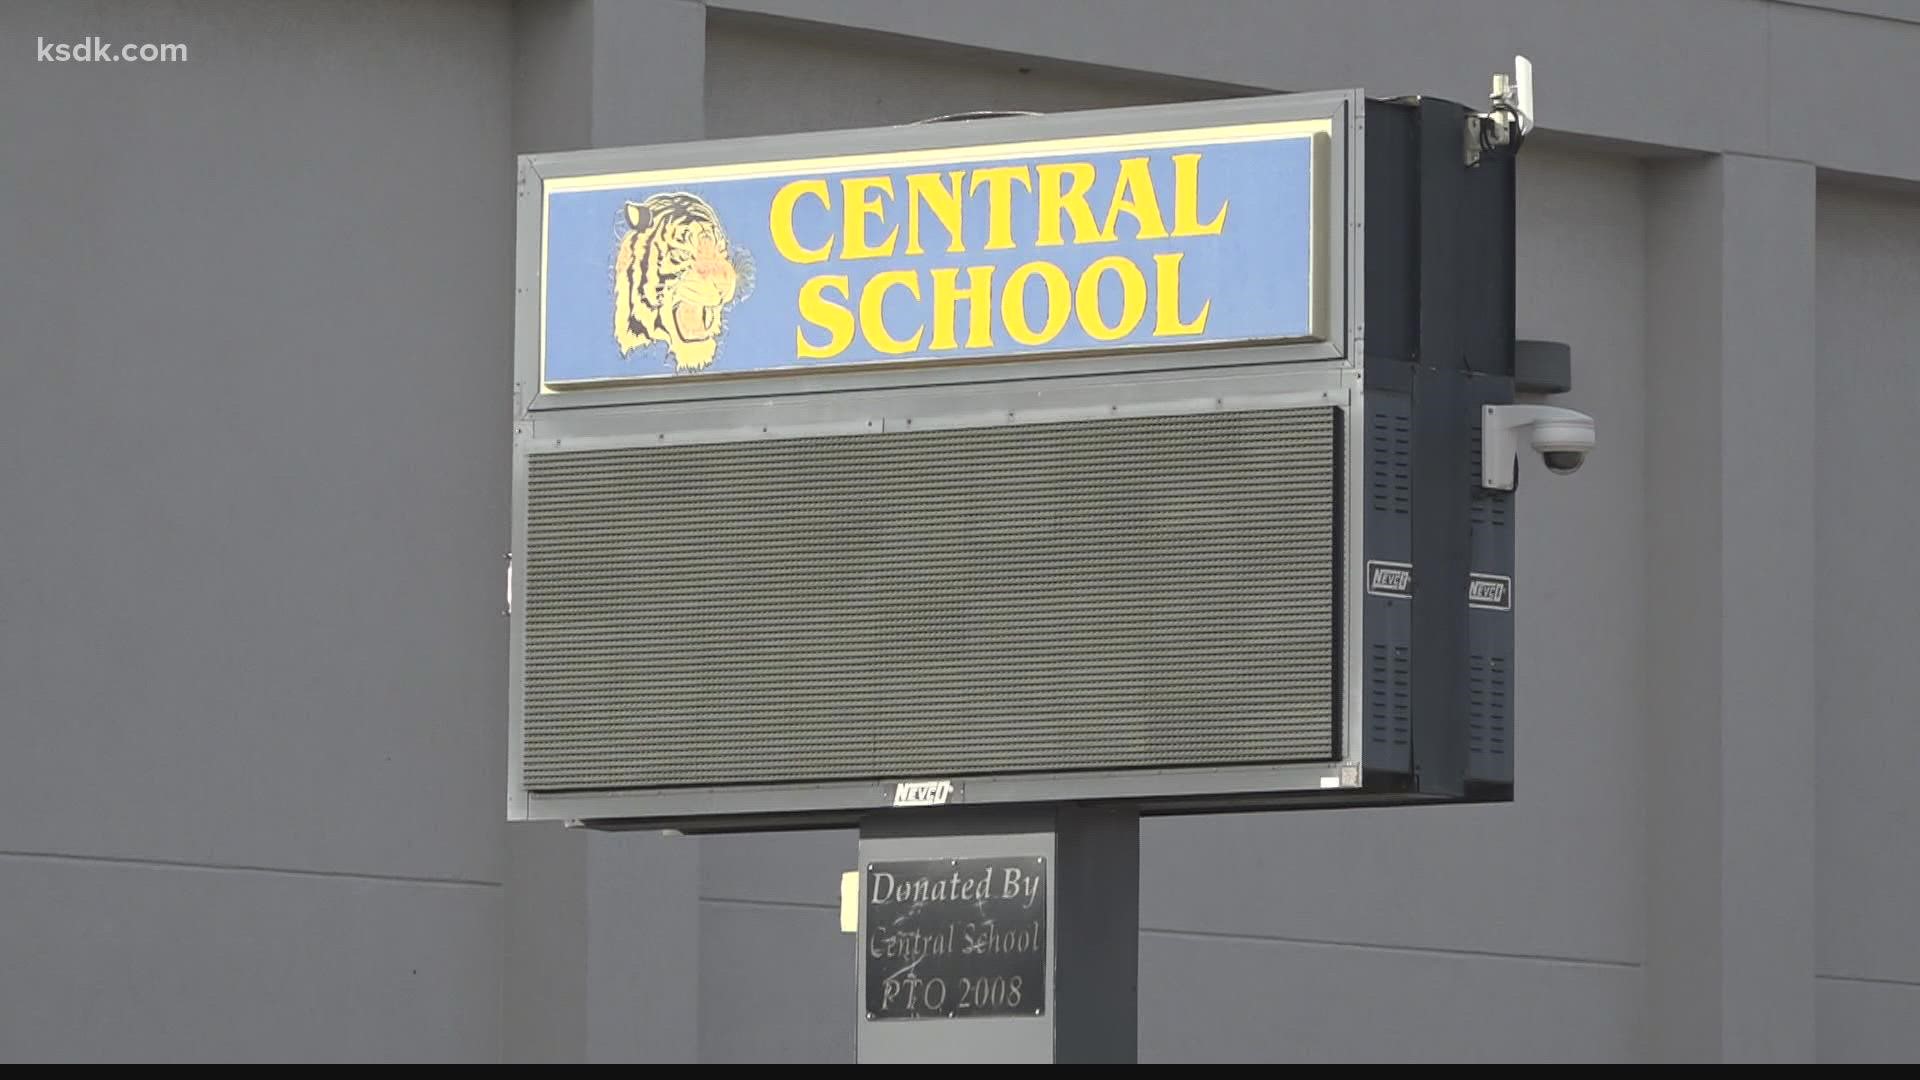 School is in session at Central Elementary School, but you won’t find a single student in the classroom for the next two weeks.